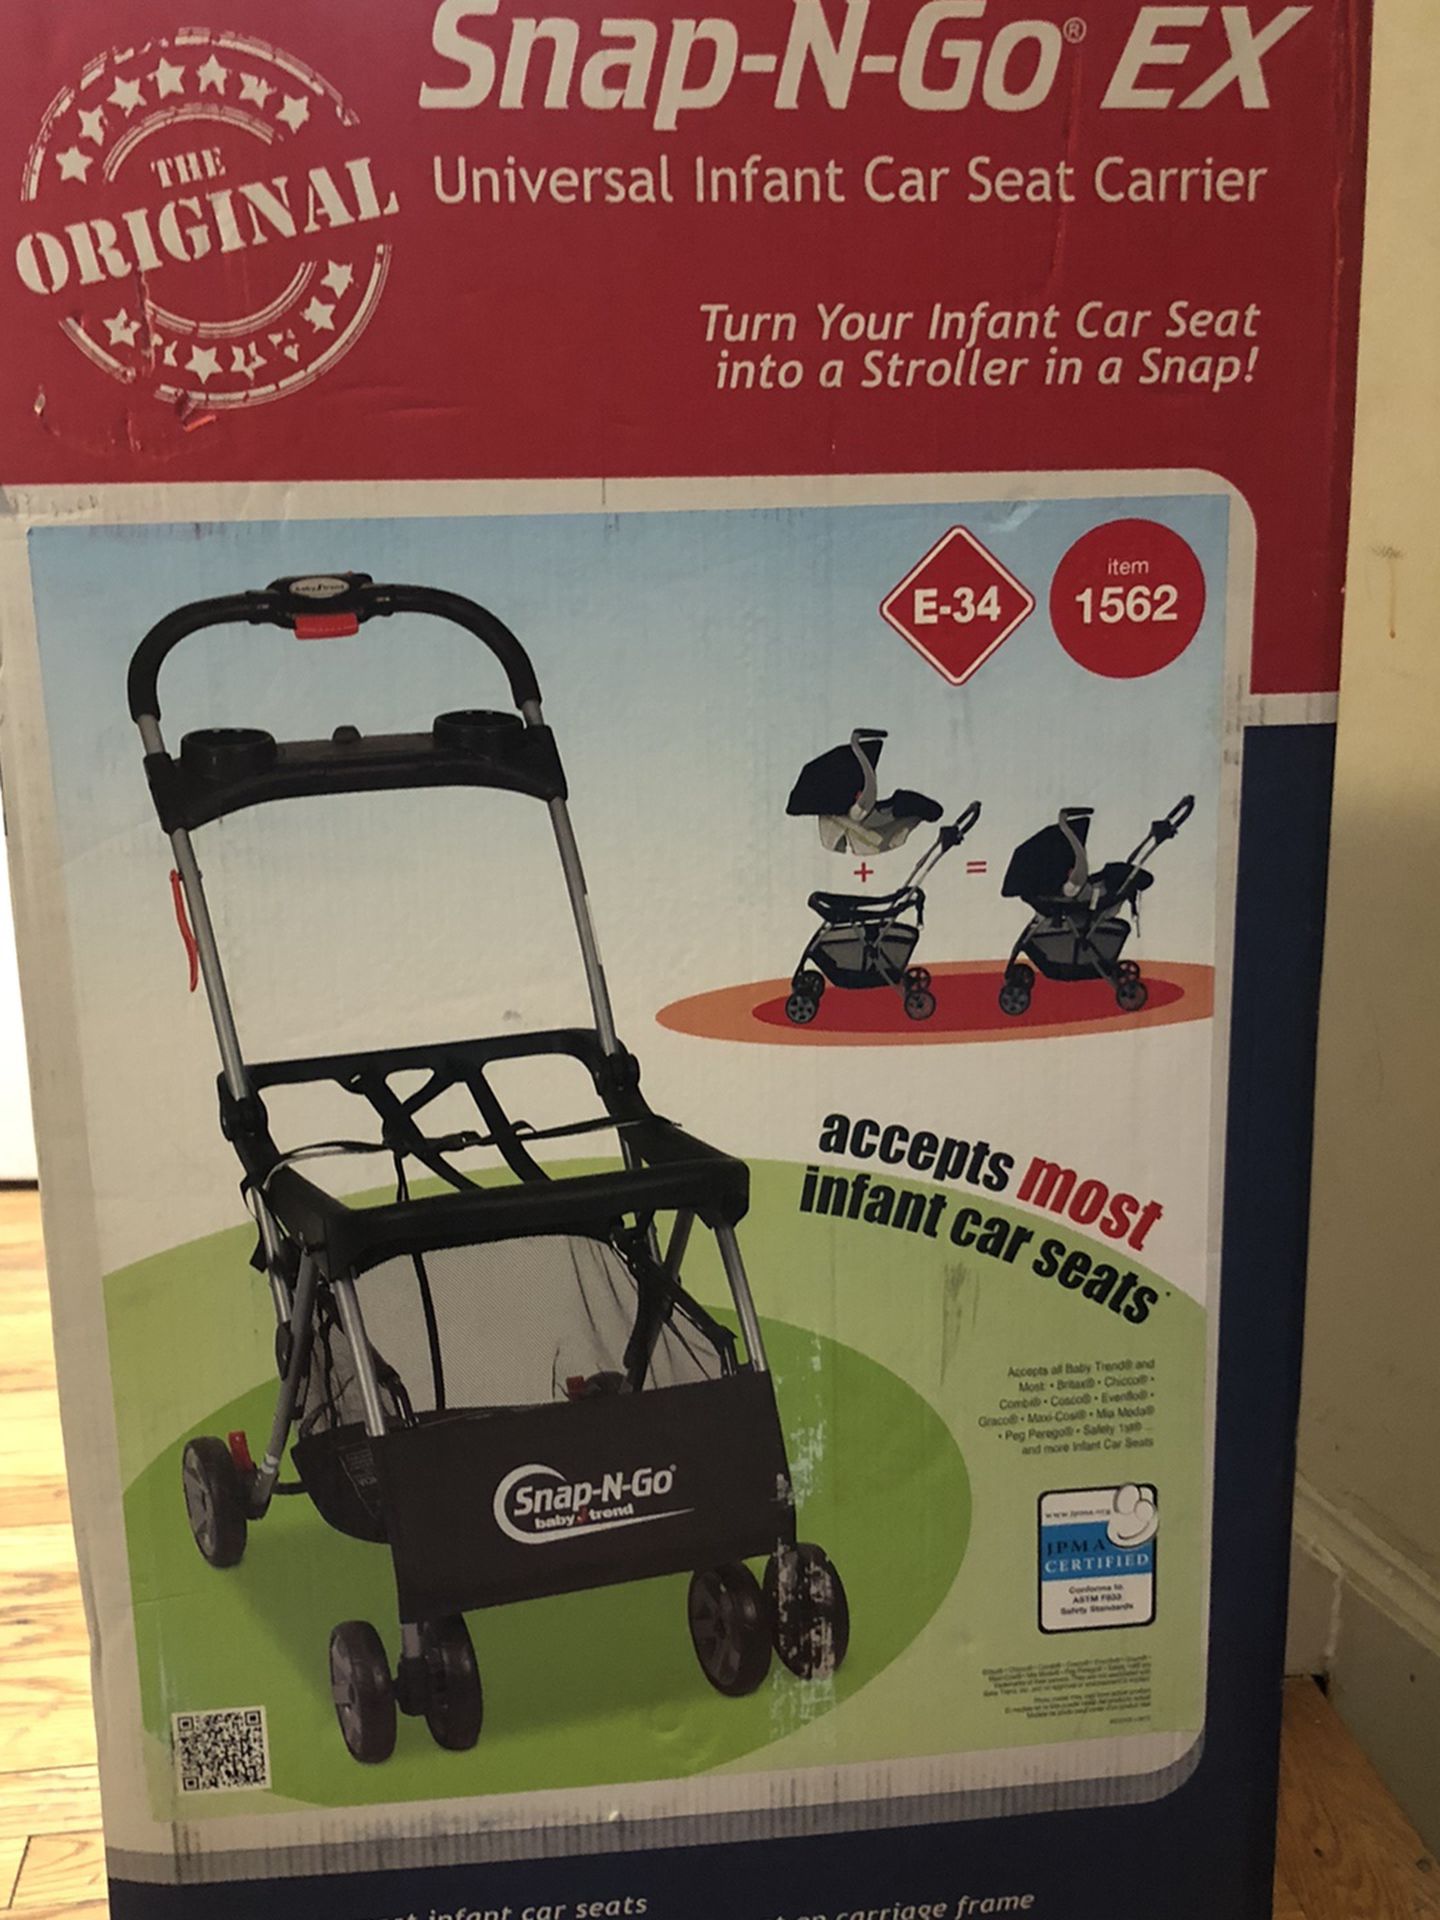 New Snap-n-go ex infent car seat strolle